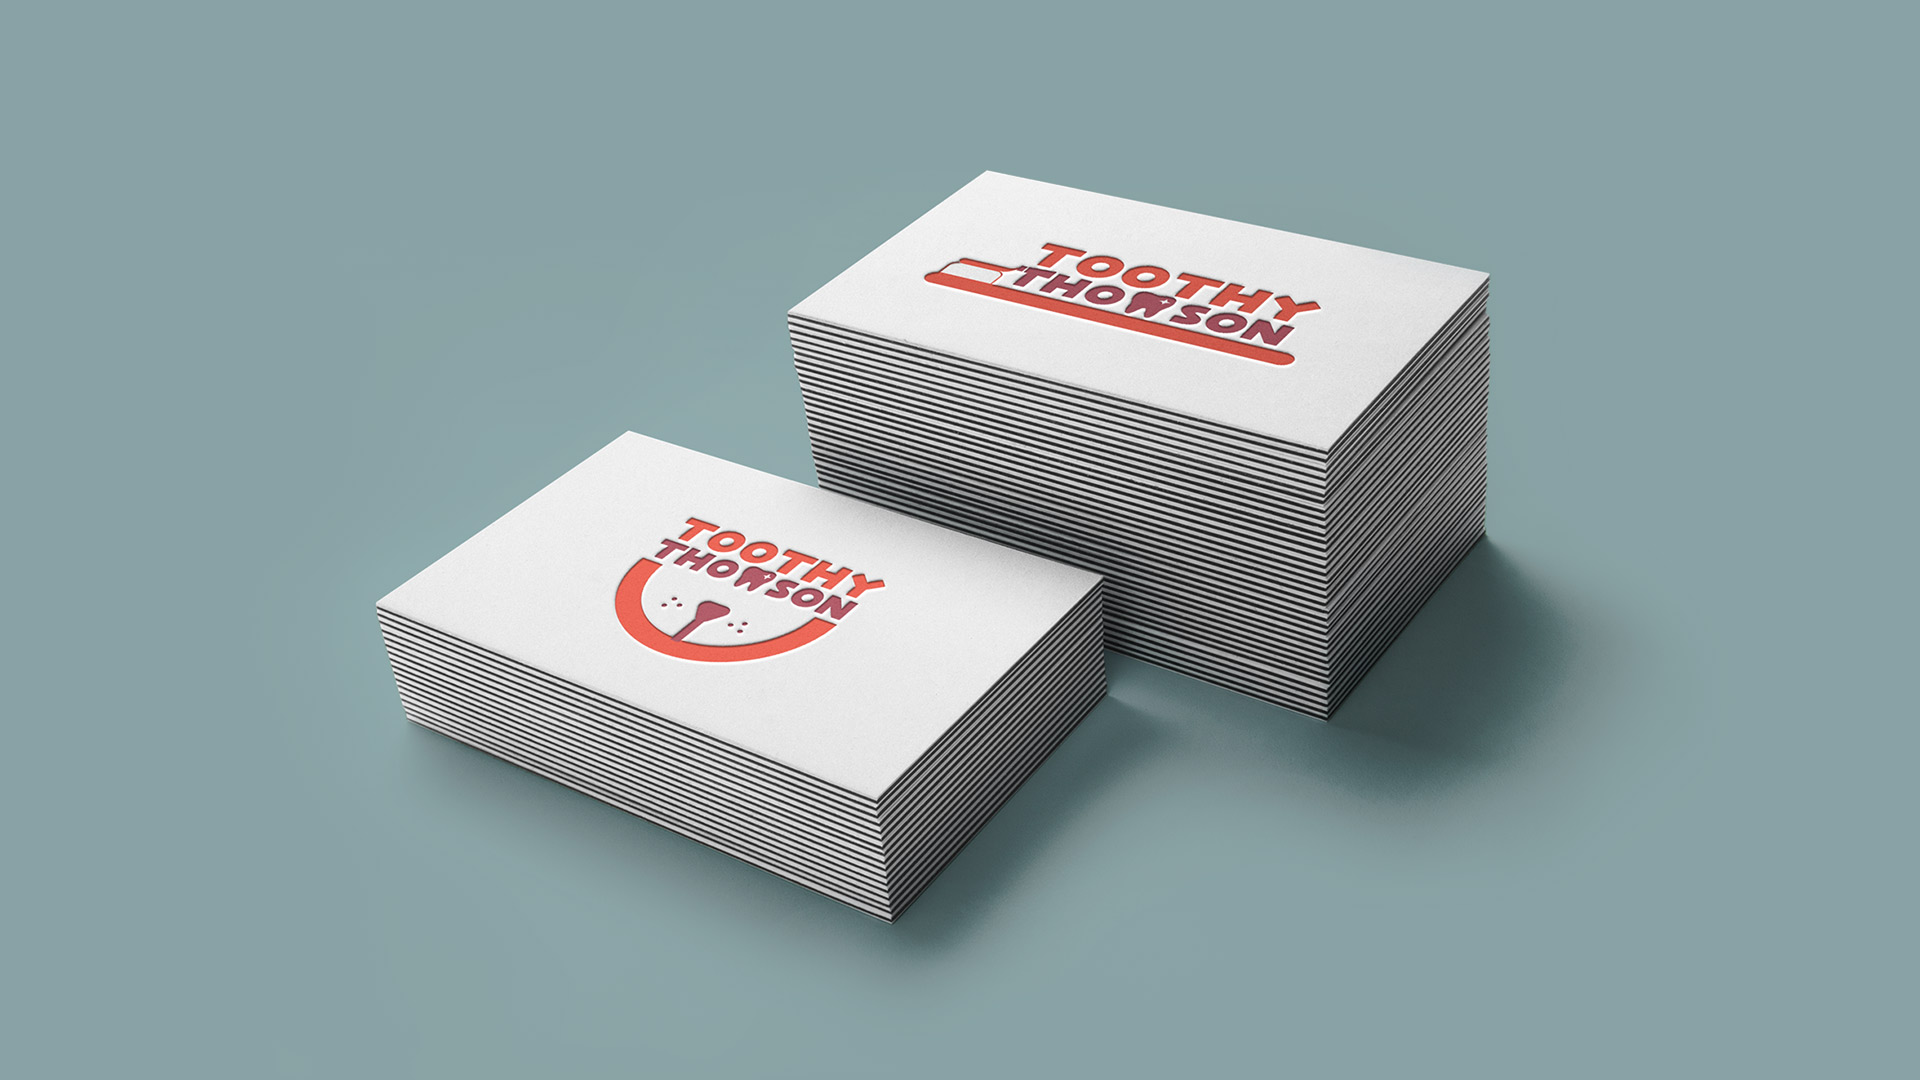 Toothy Thomson business cards